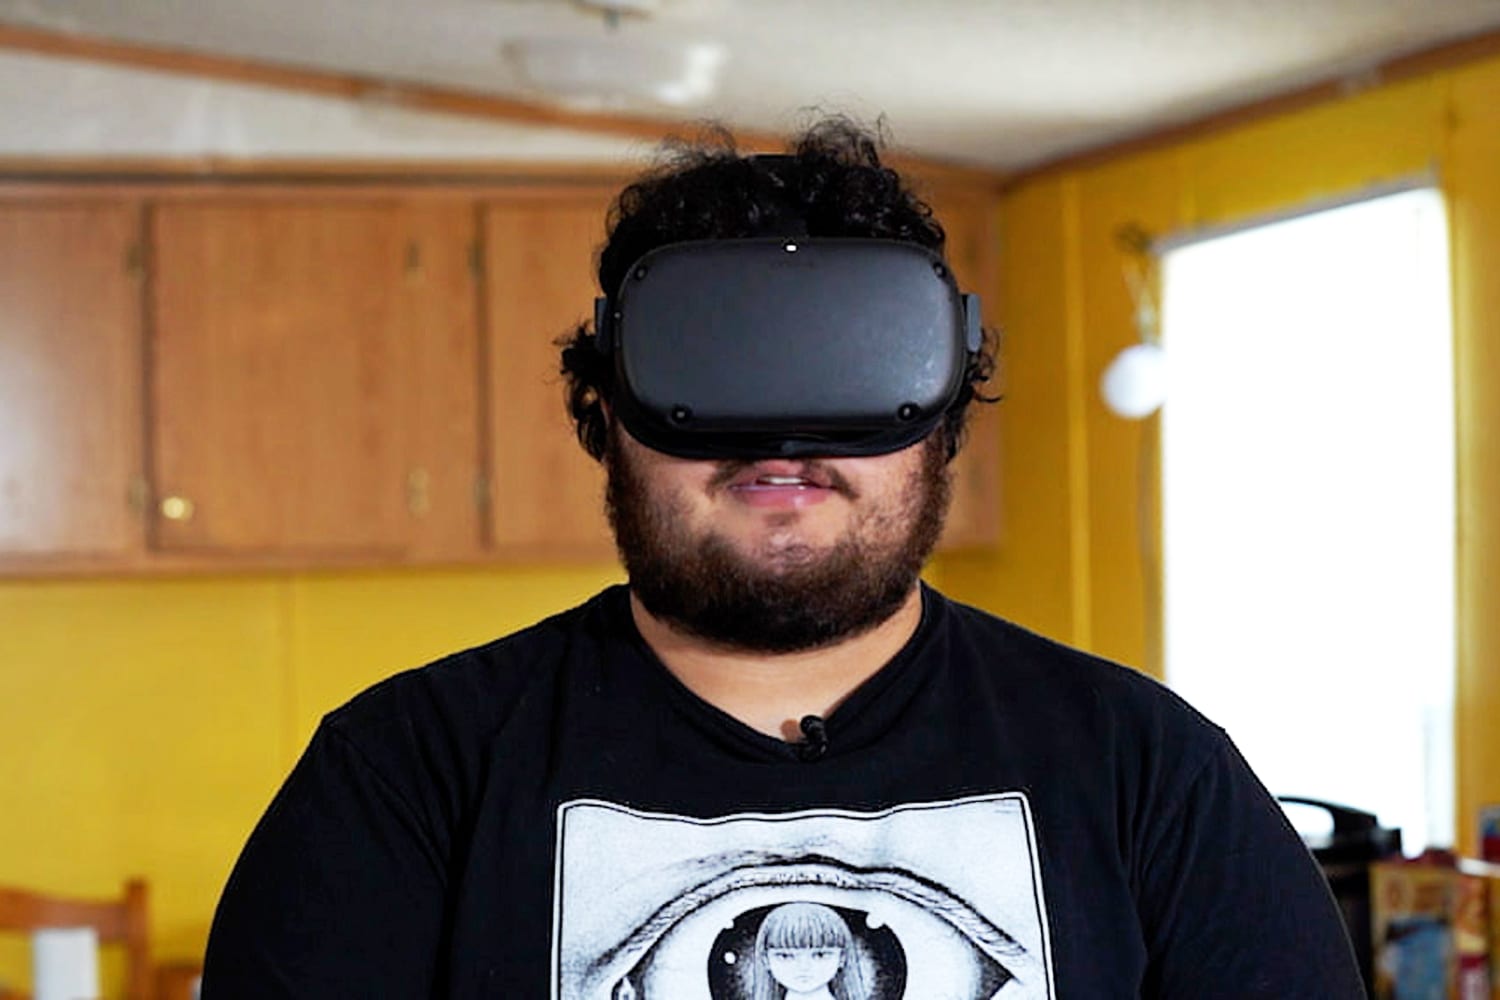 New virtual reality apps focus on mental health, but their effectiveness is unstudied